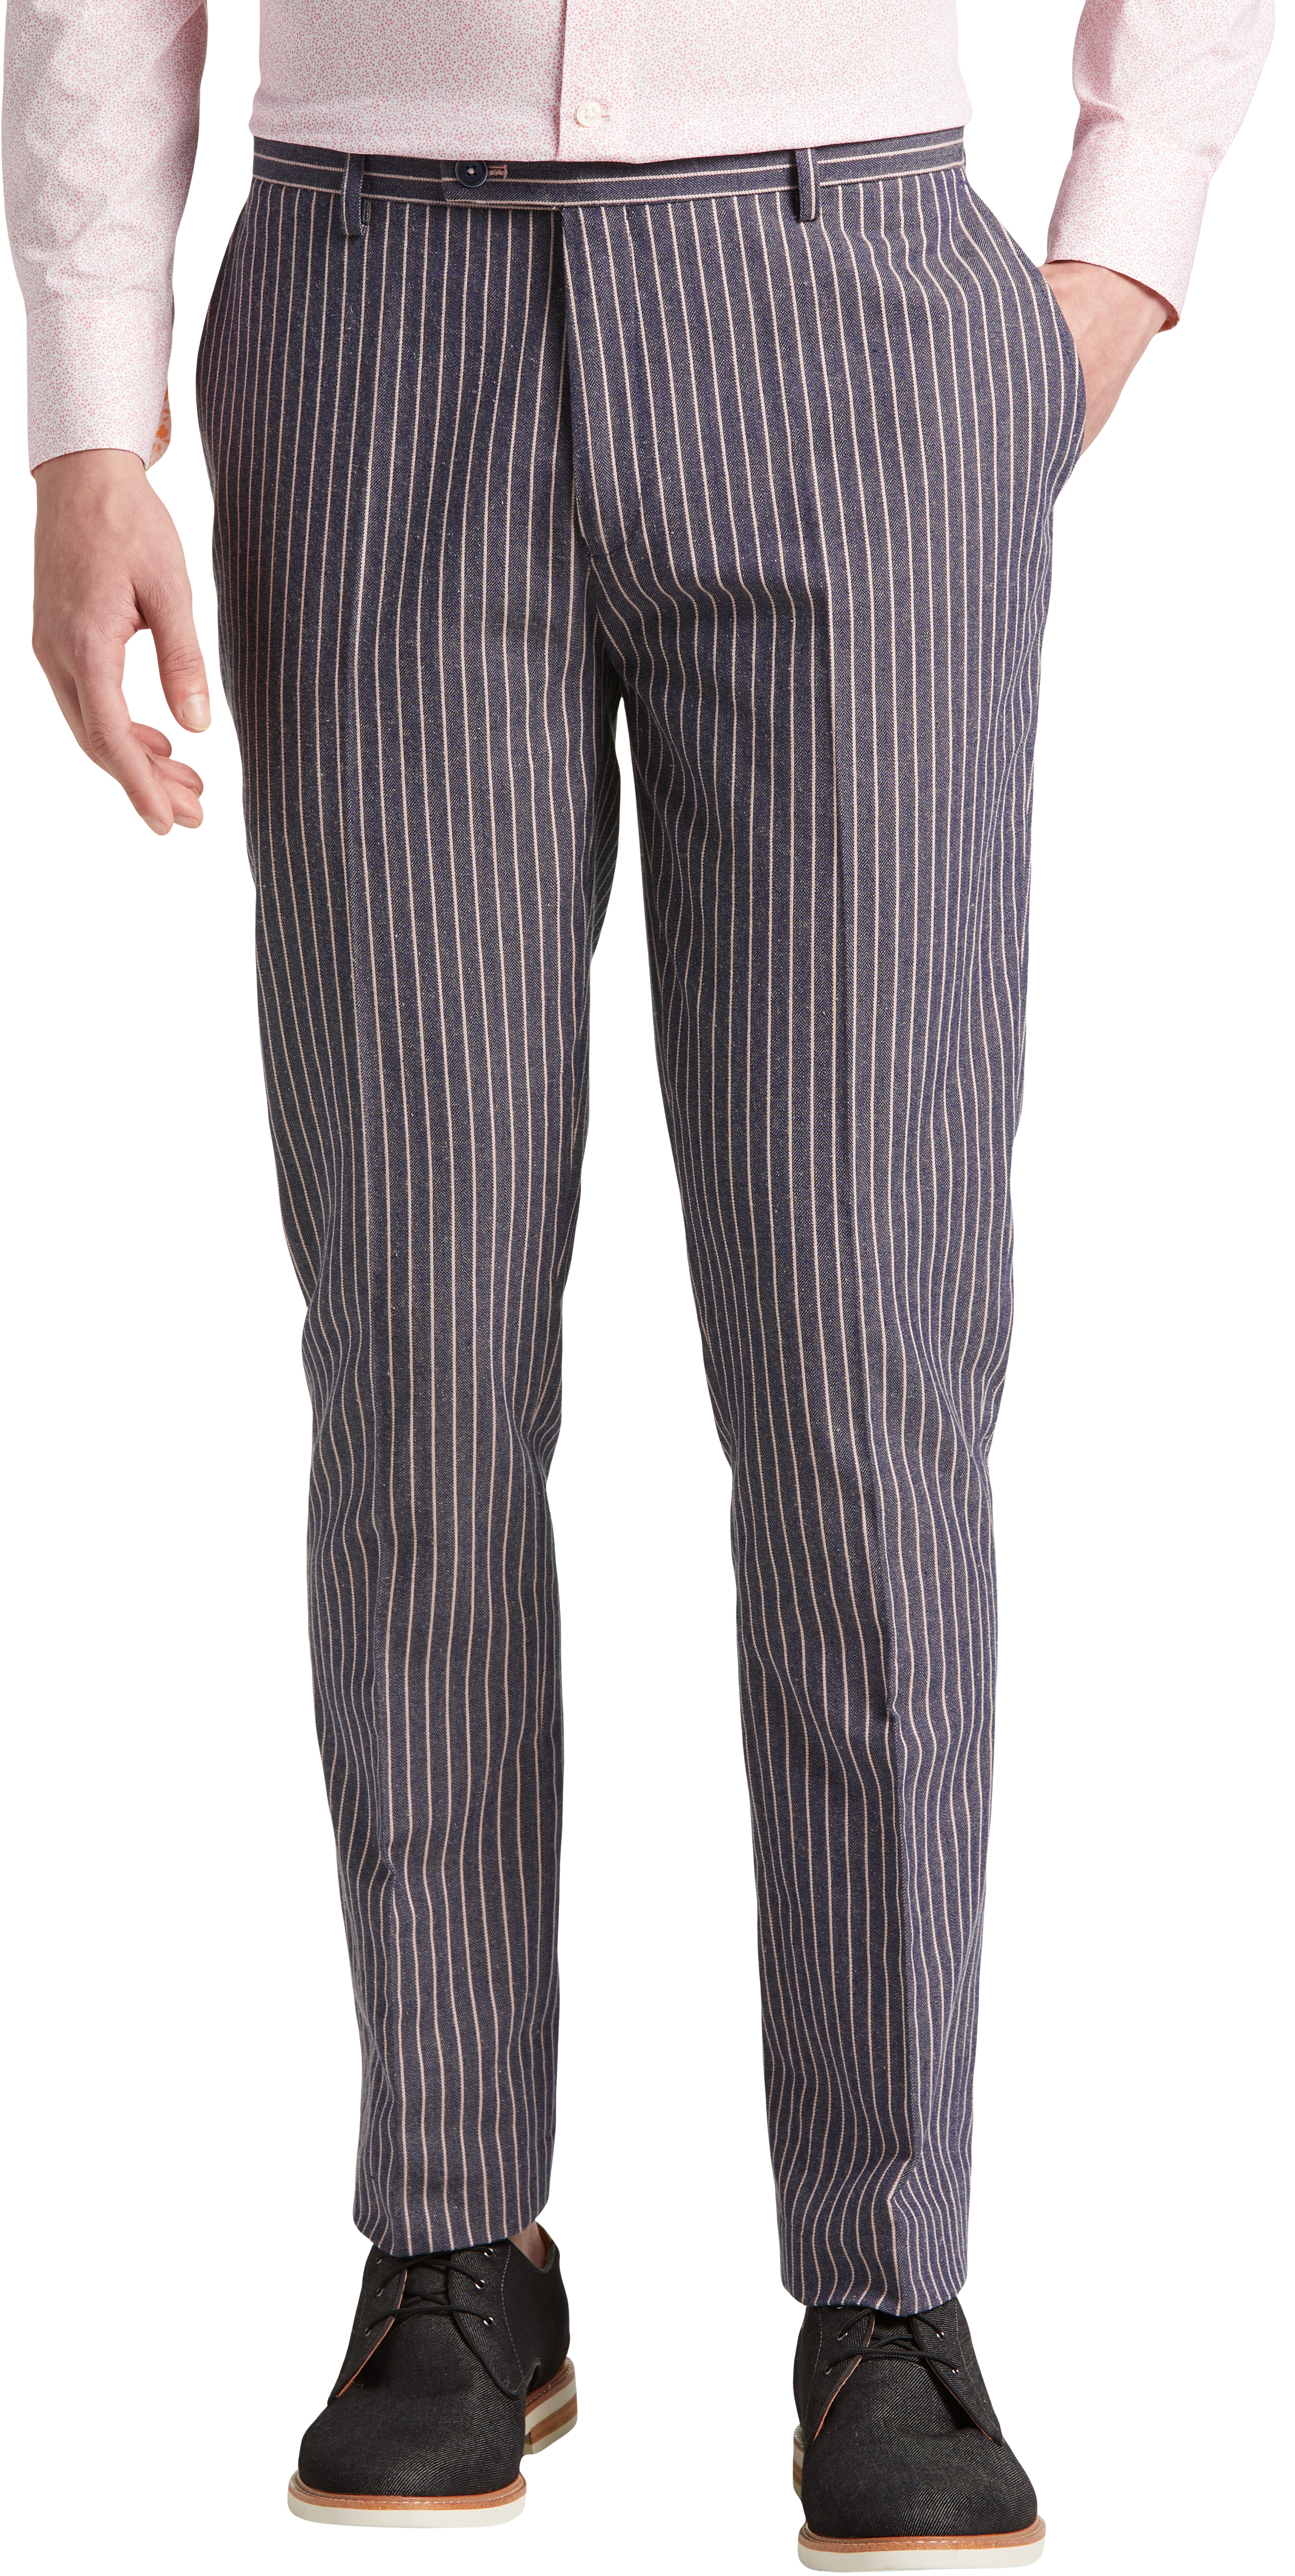 Paisley & Gray Slim Fit Suit Separates Pants, Blue and Pink Stripes